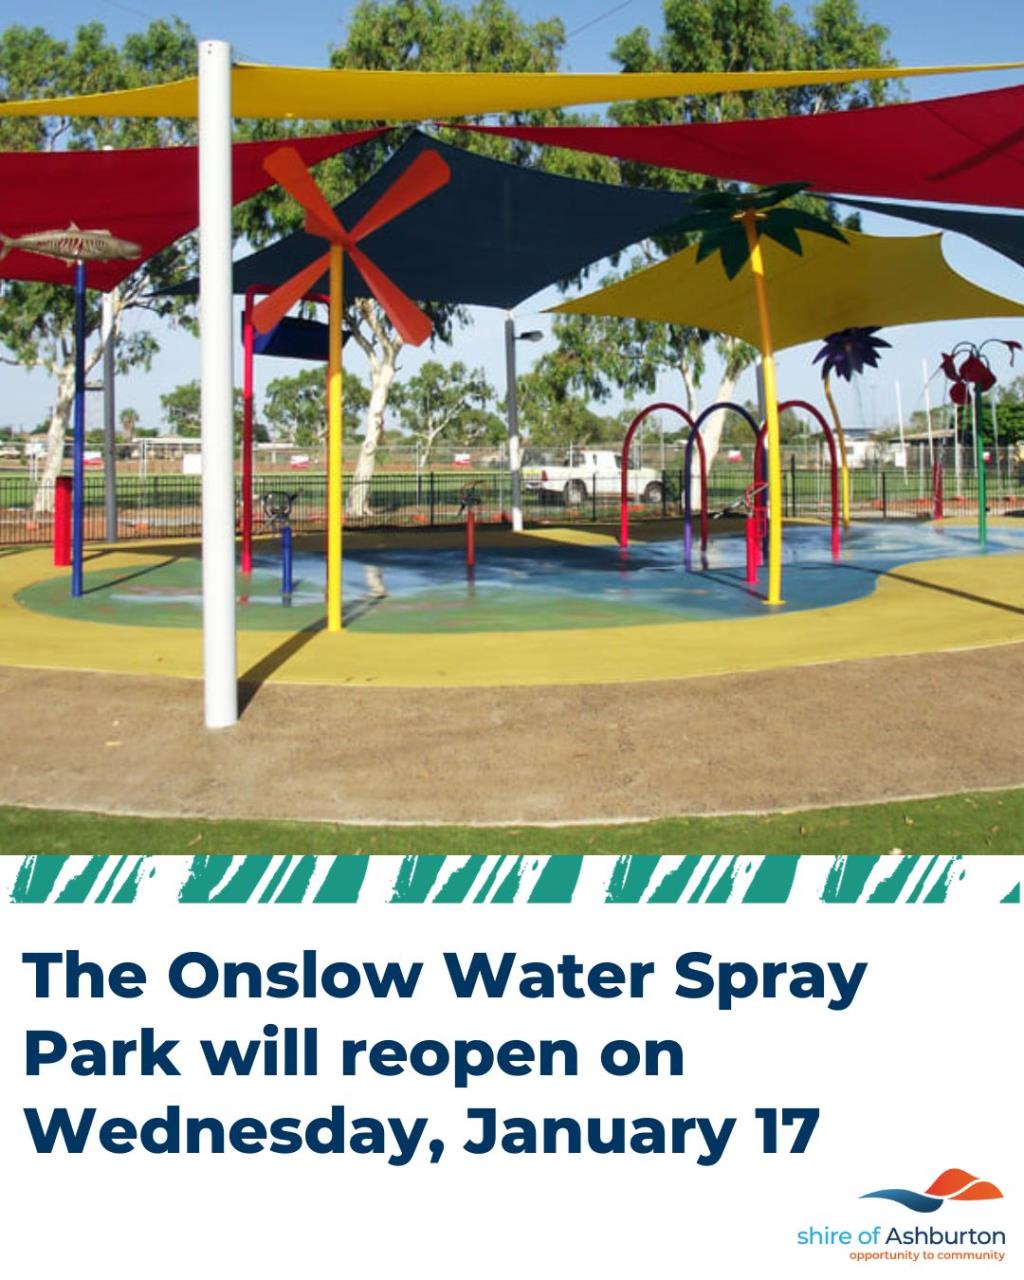 Exciting News! Onslow Water Spray Park is re-opening Wednesday January 17